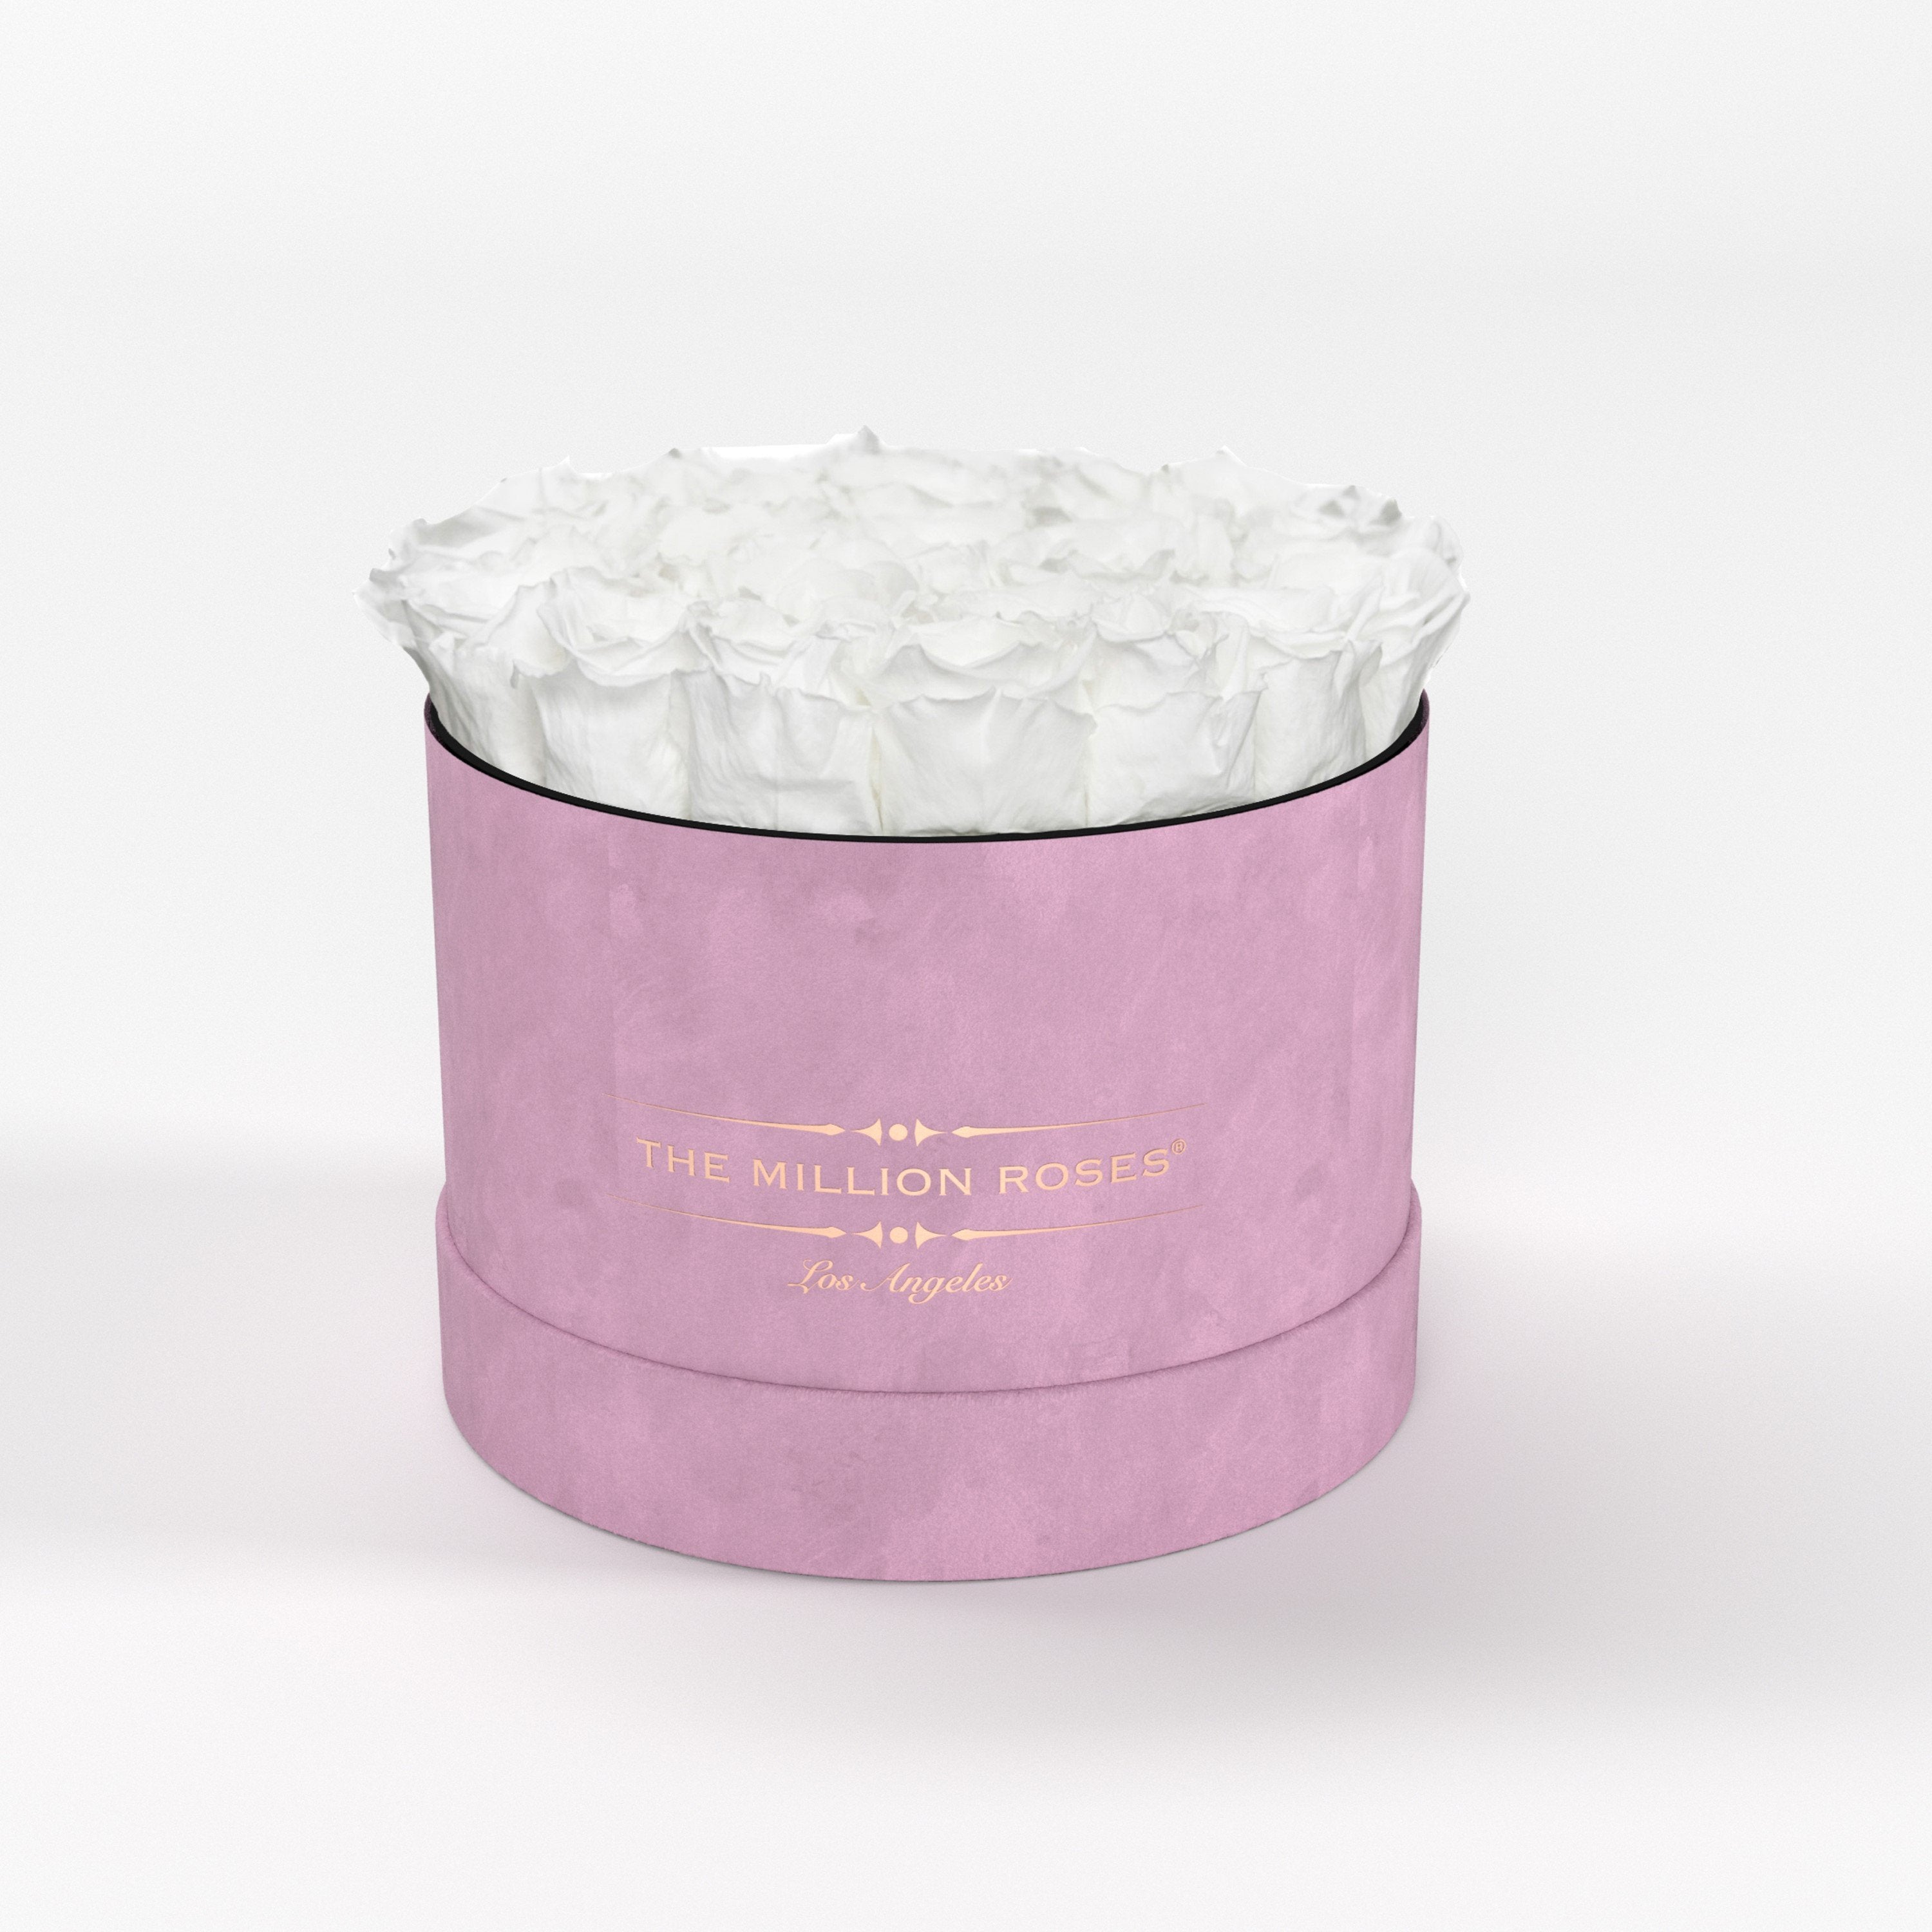 ( LA ) Light Pink - Suede - Classic Box with White Roses Kit - the million roses